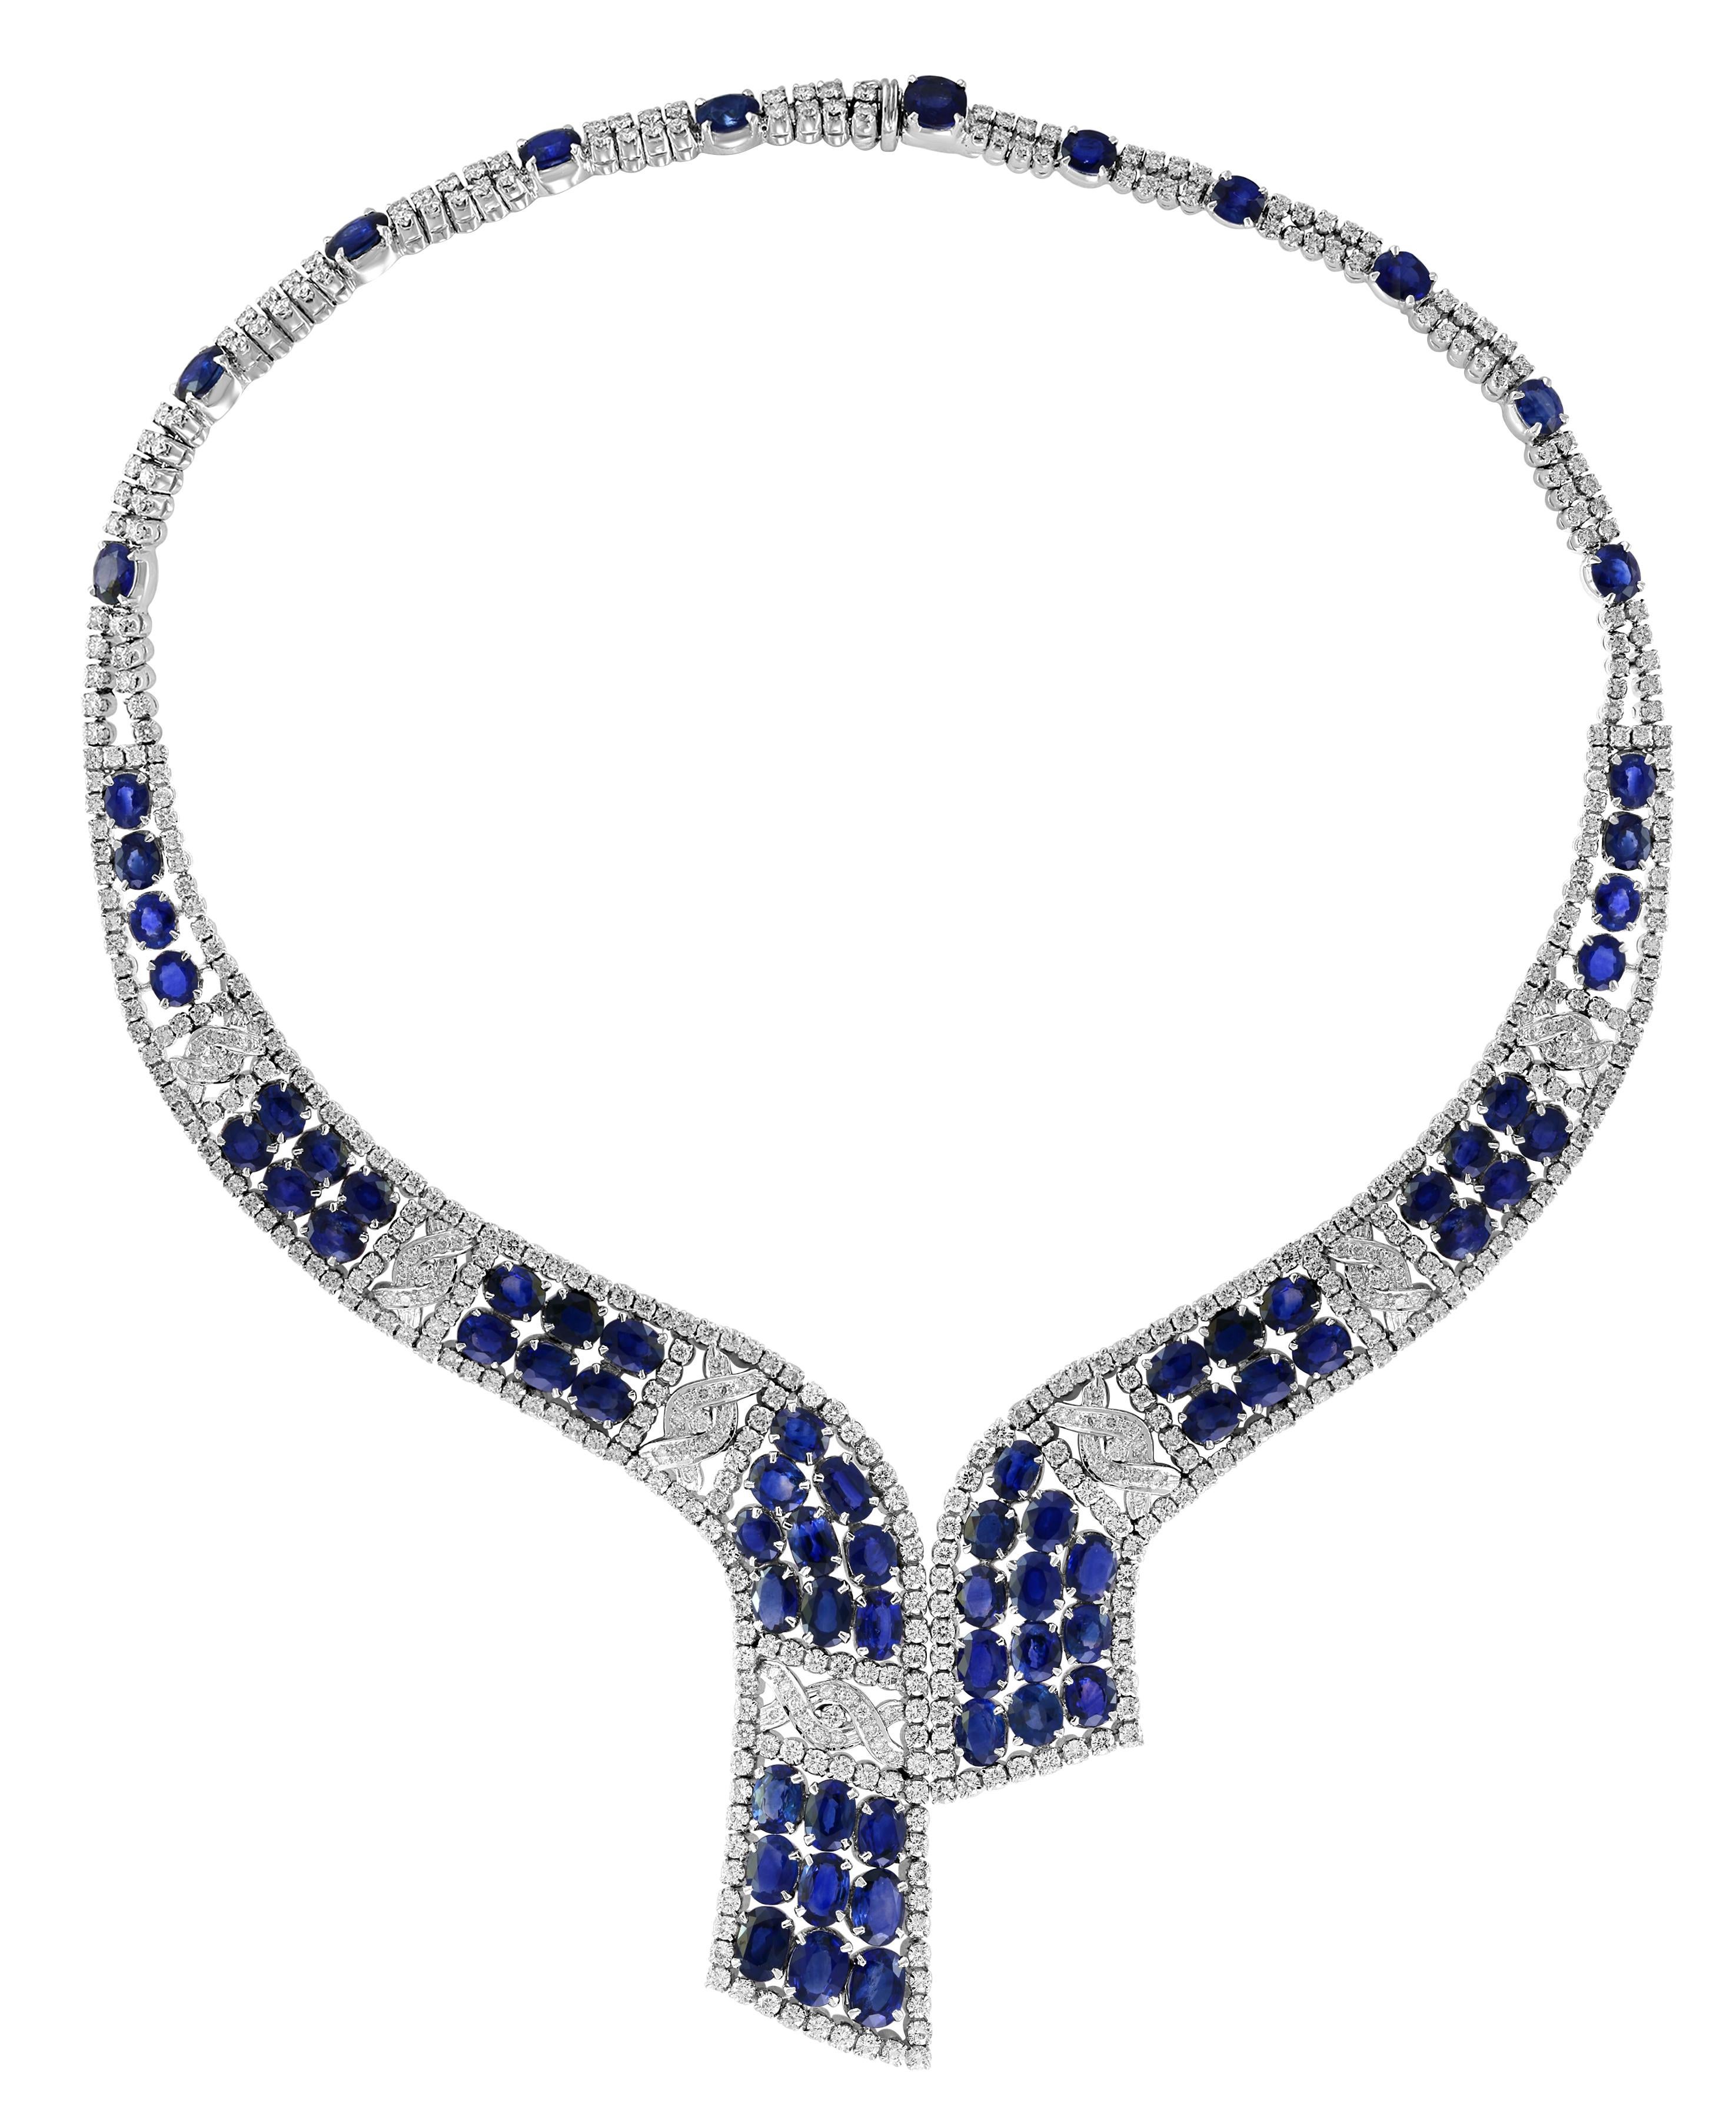  
GIA Certified 102 Ct Natural Blue Sapphire & 25 Ct Diamond Necklace Suite 18 Karat white gold , Bridal 
 This bridal suite  made out of 18 Karat gold .Necklace consisting of oval shape  natural sapphires  having a total weight of 102 carats set